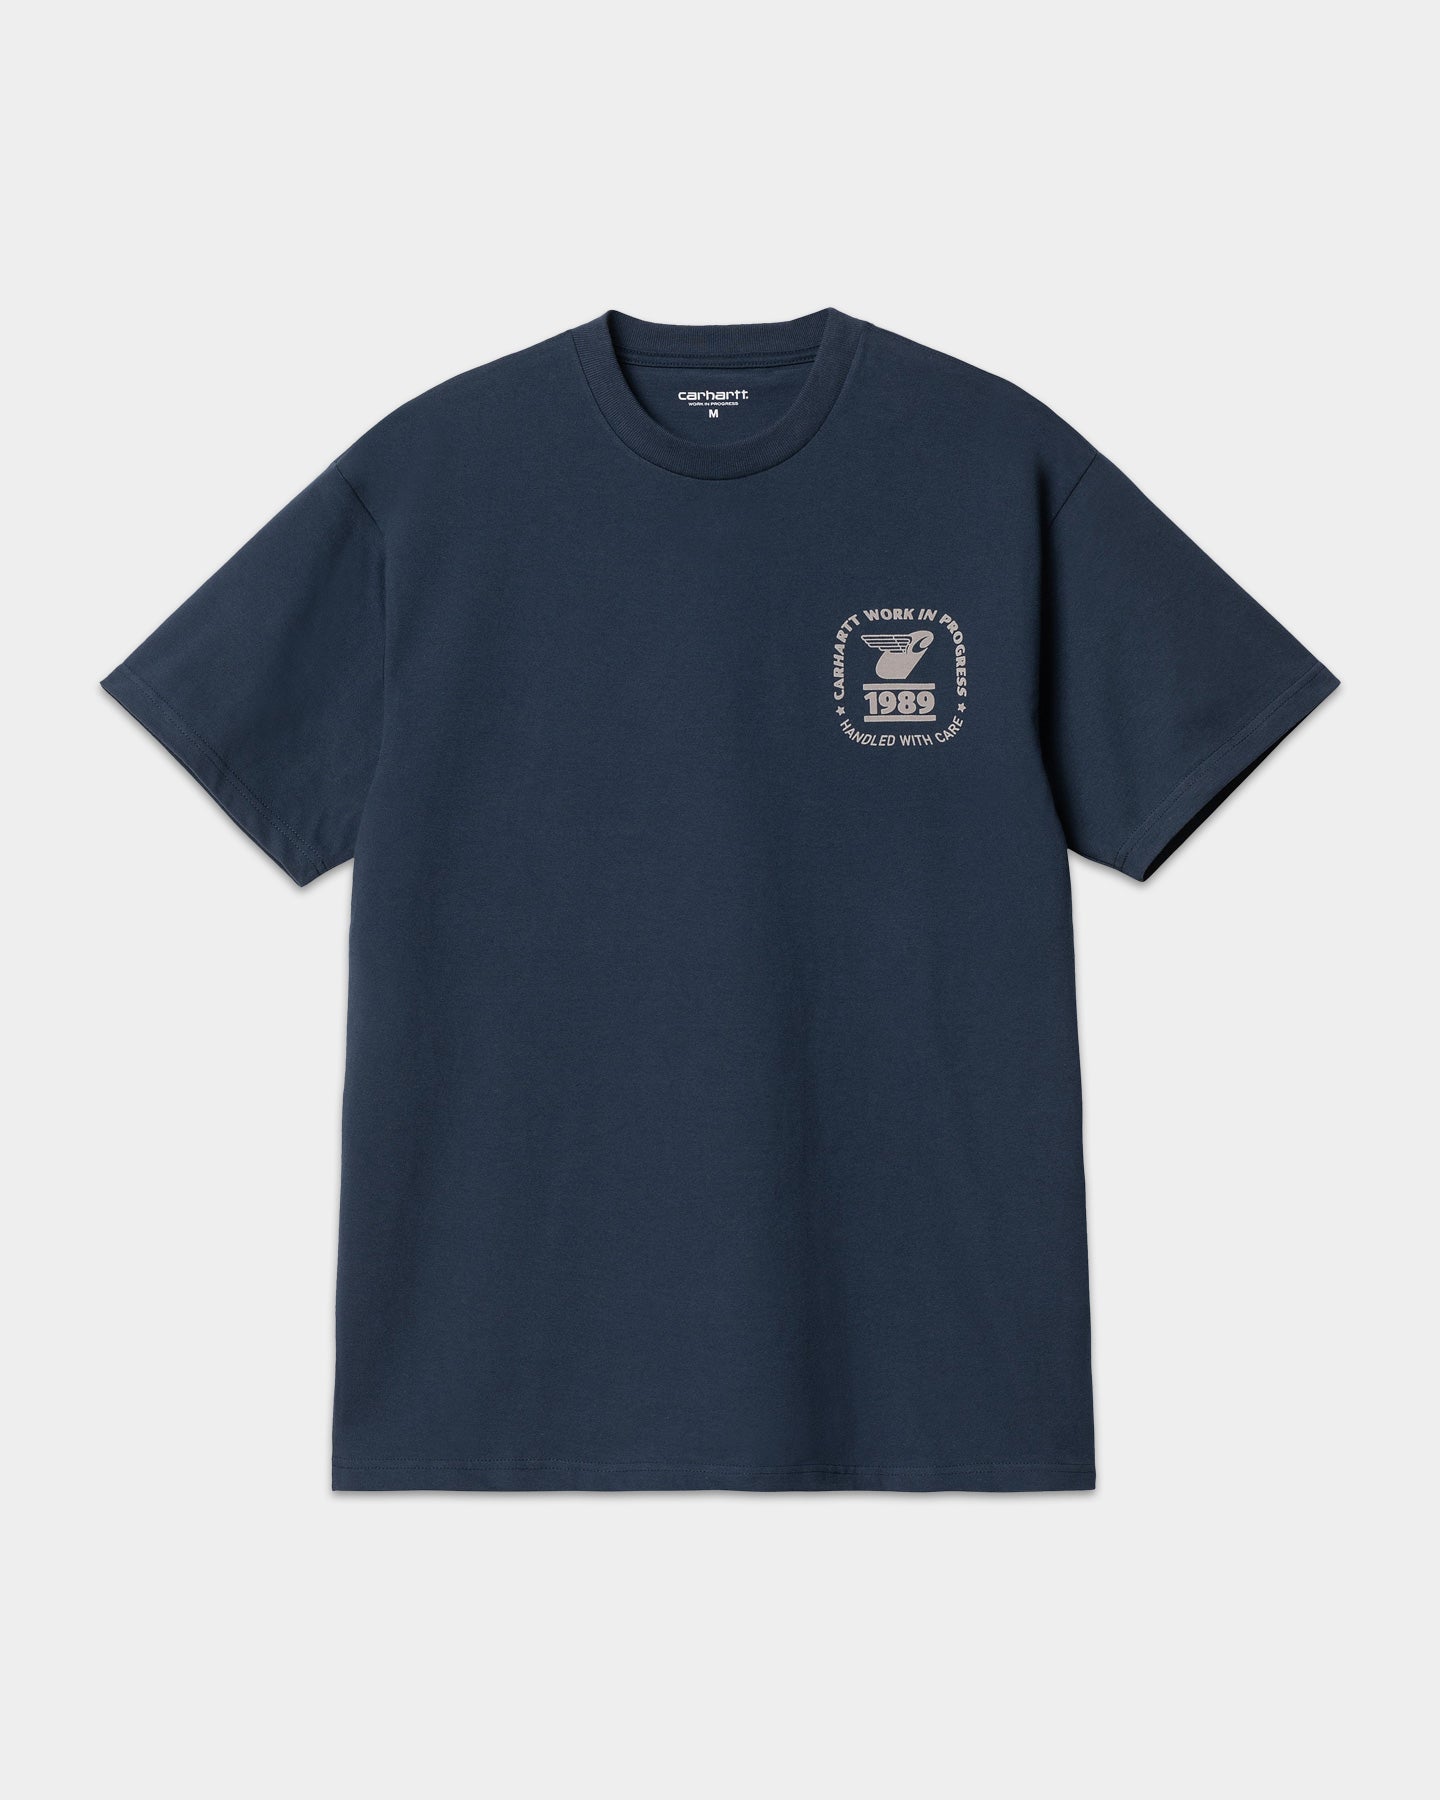 S/S STAMP STATE T-SHIRT - blue/grey